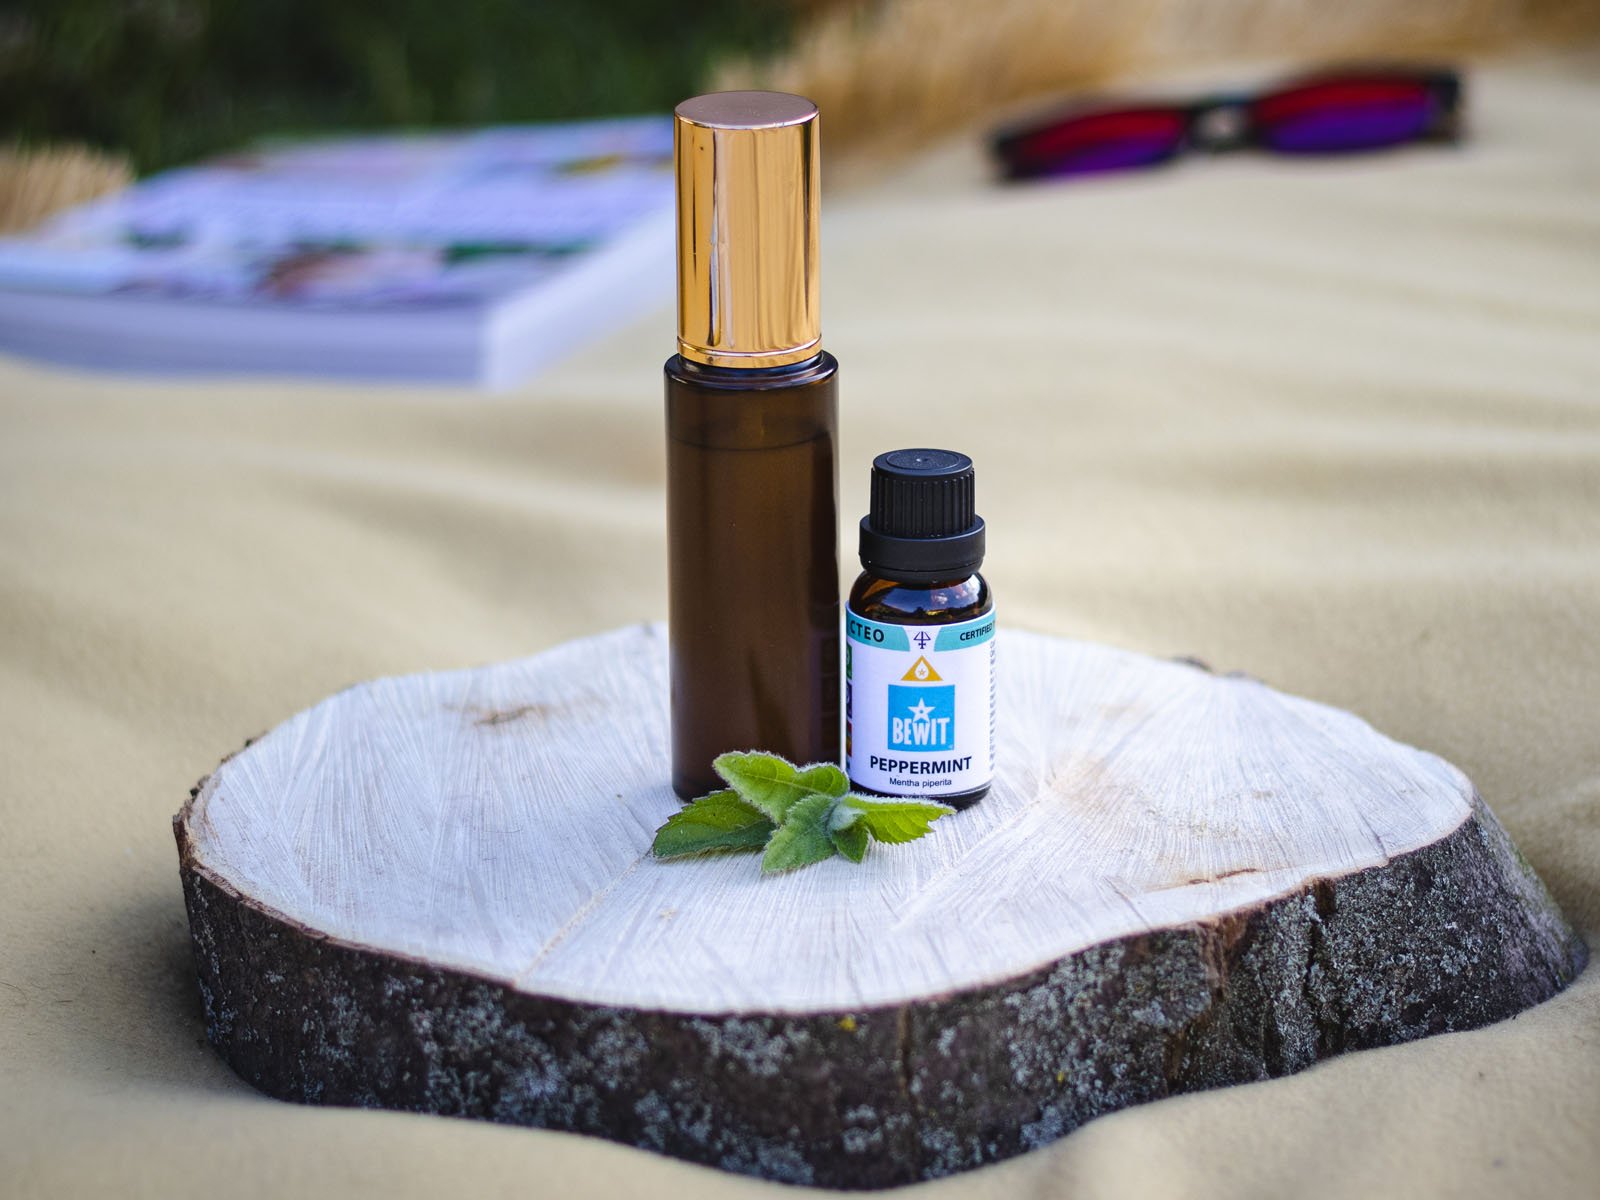 Peppermint - It is a 100% pure essential oil - 6